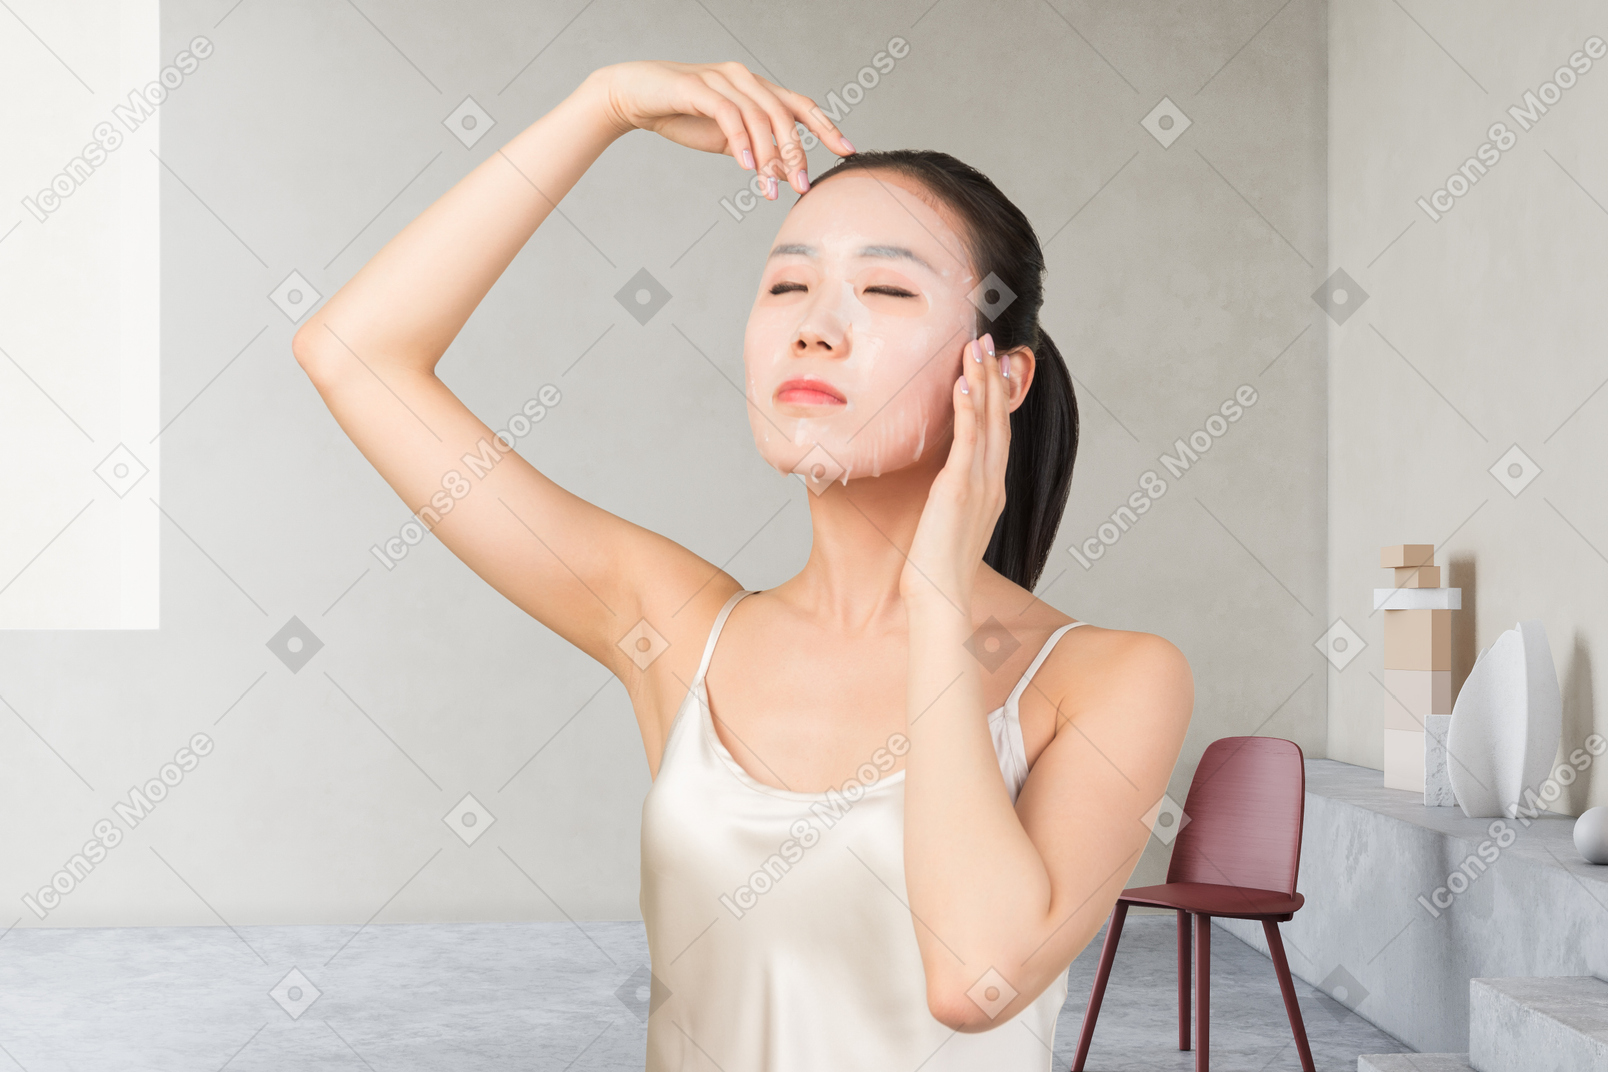 A woman in a white tank top applying a face mask